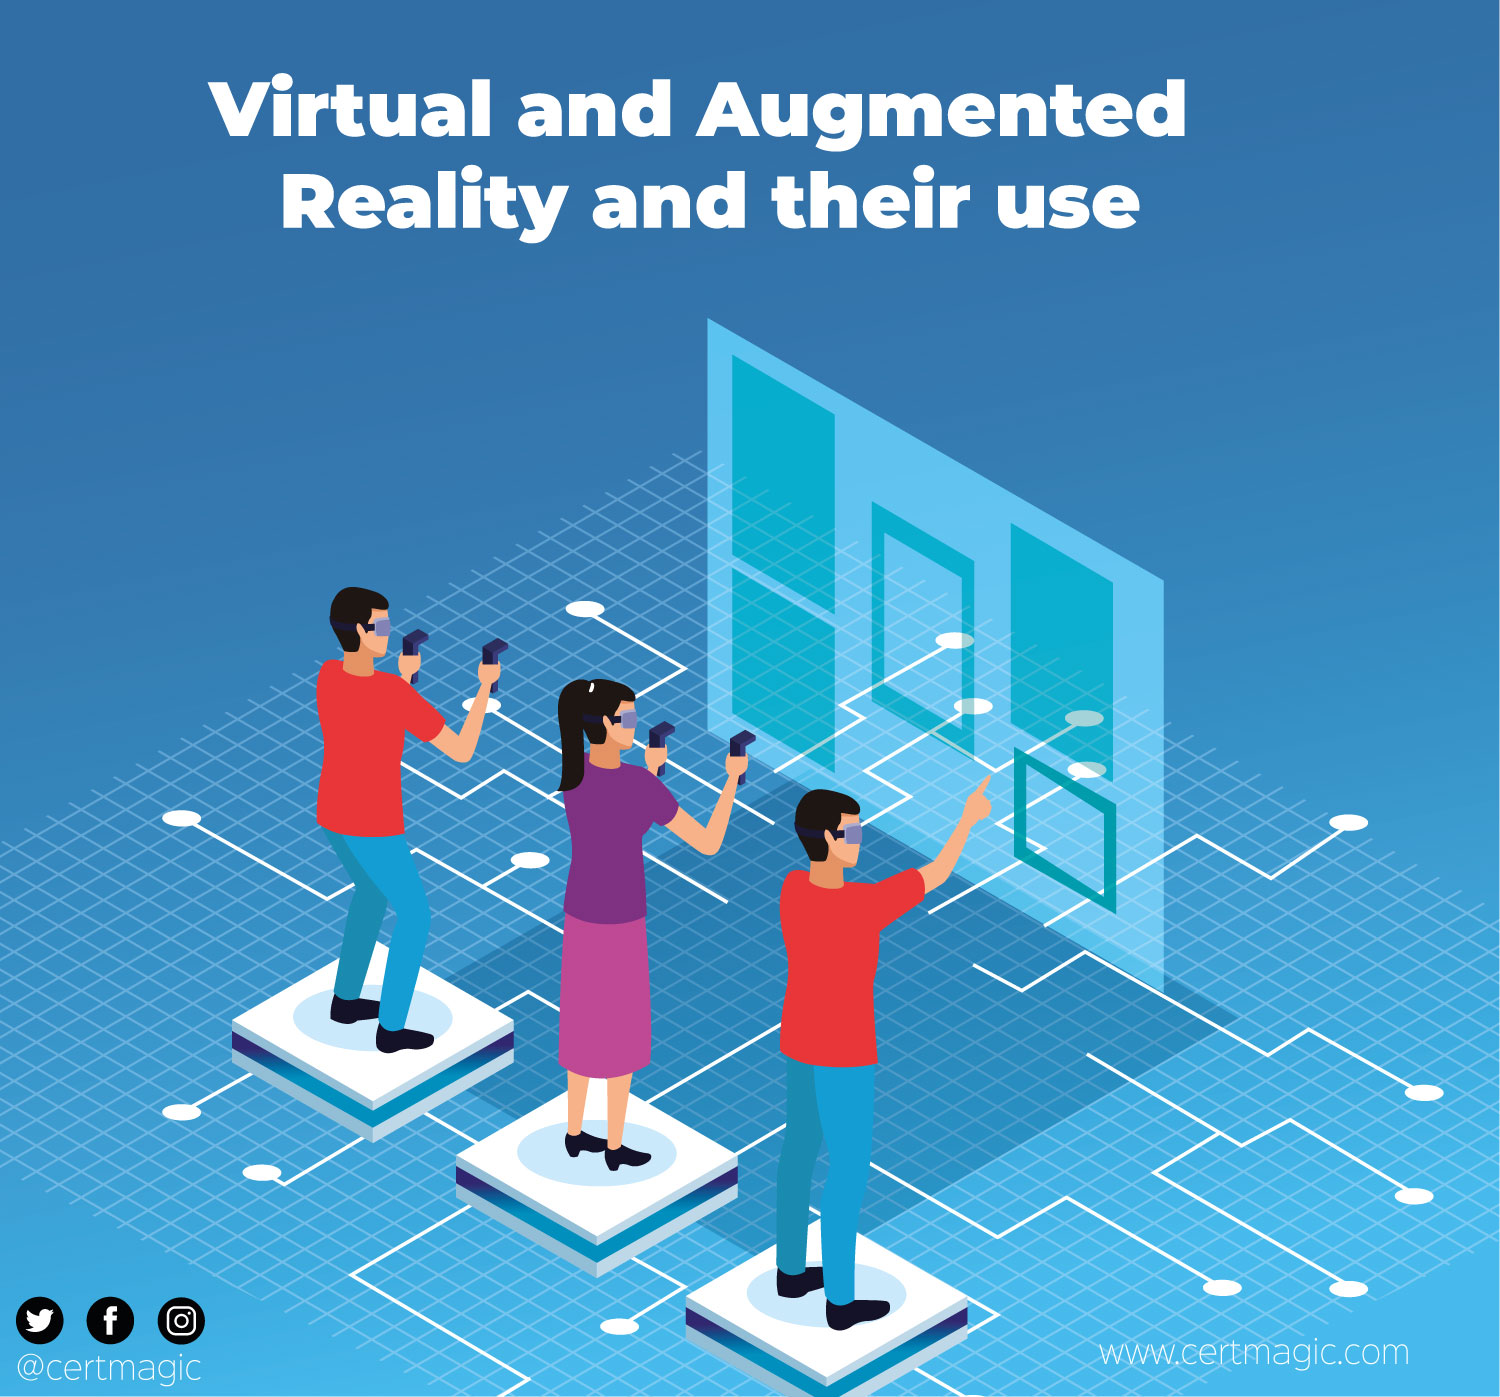 Virtual and Augmented Reality and their use in various fields